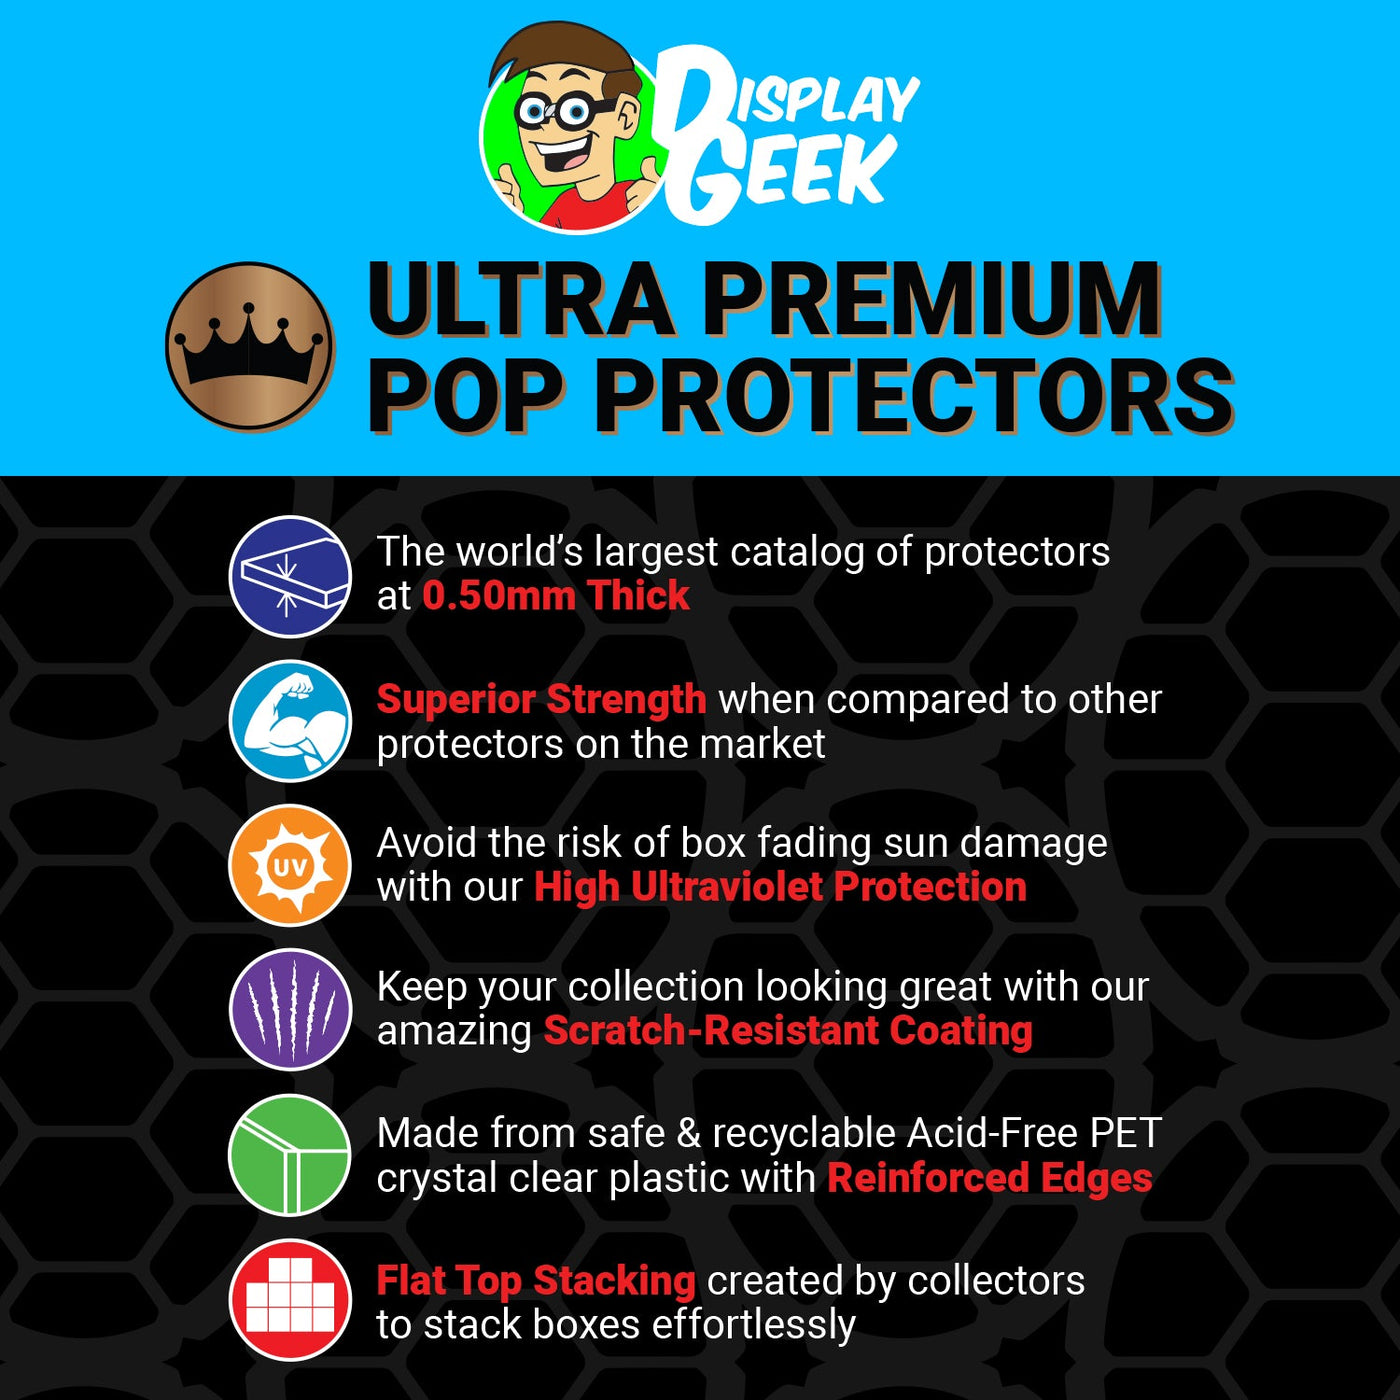 Pop Protector for John Hammond with Gates #30 Funko Pop Town on The Protector Guide App by Display Geek